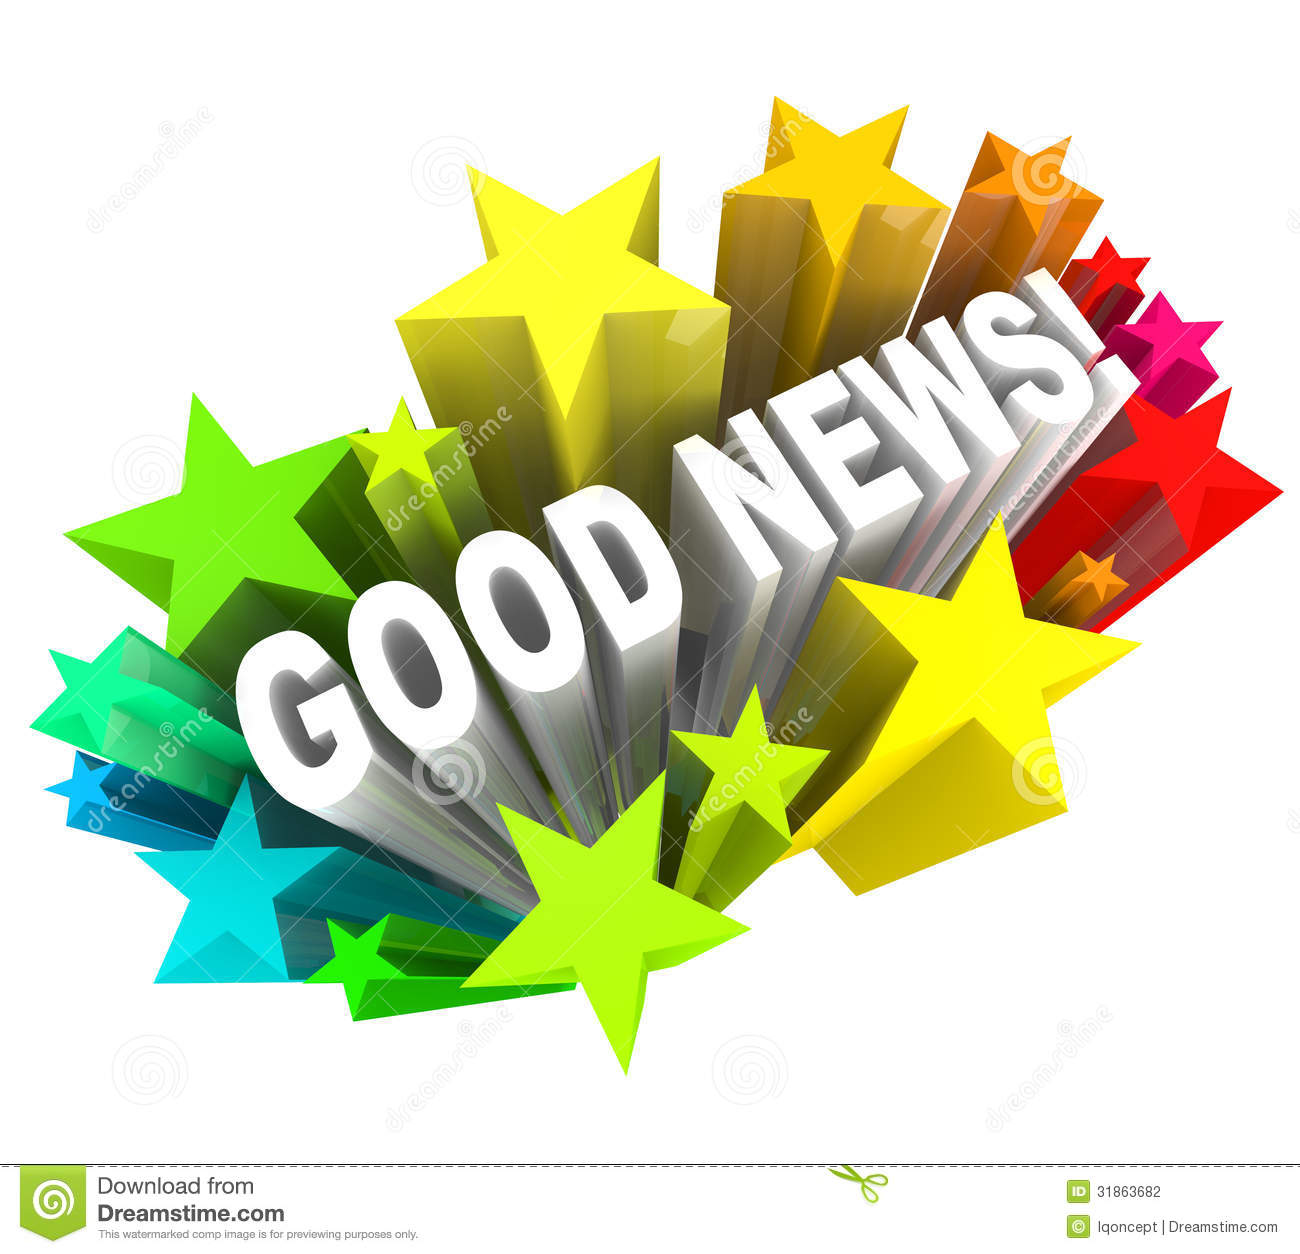 The Words Good News In A Colorful Burst Of Stars Or Fireworks To